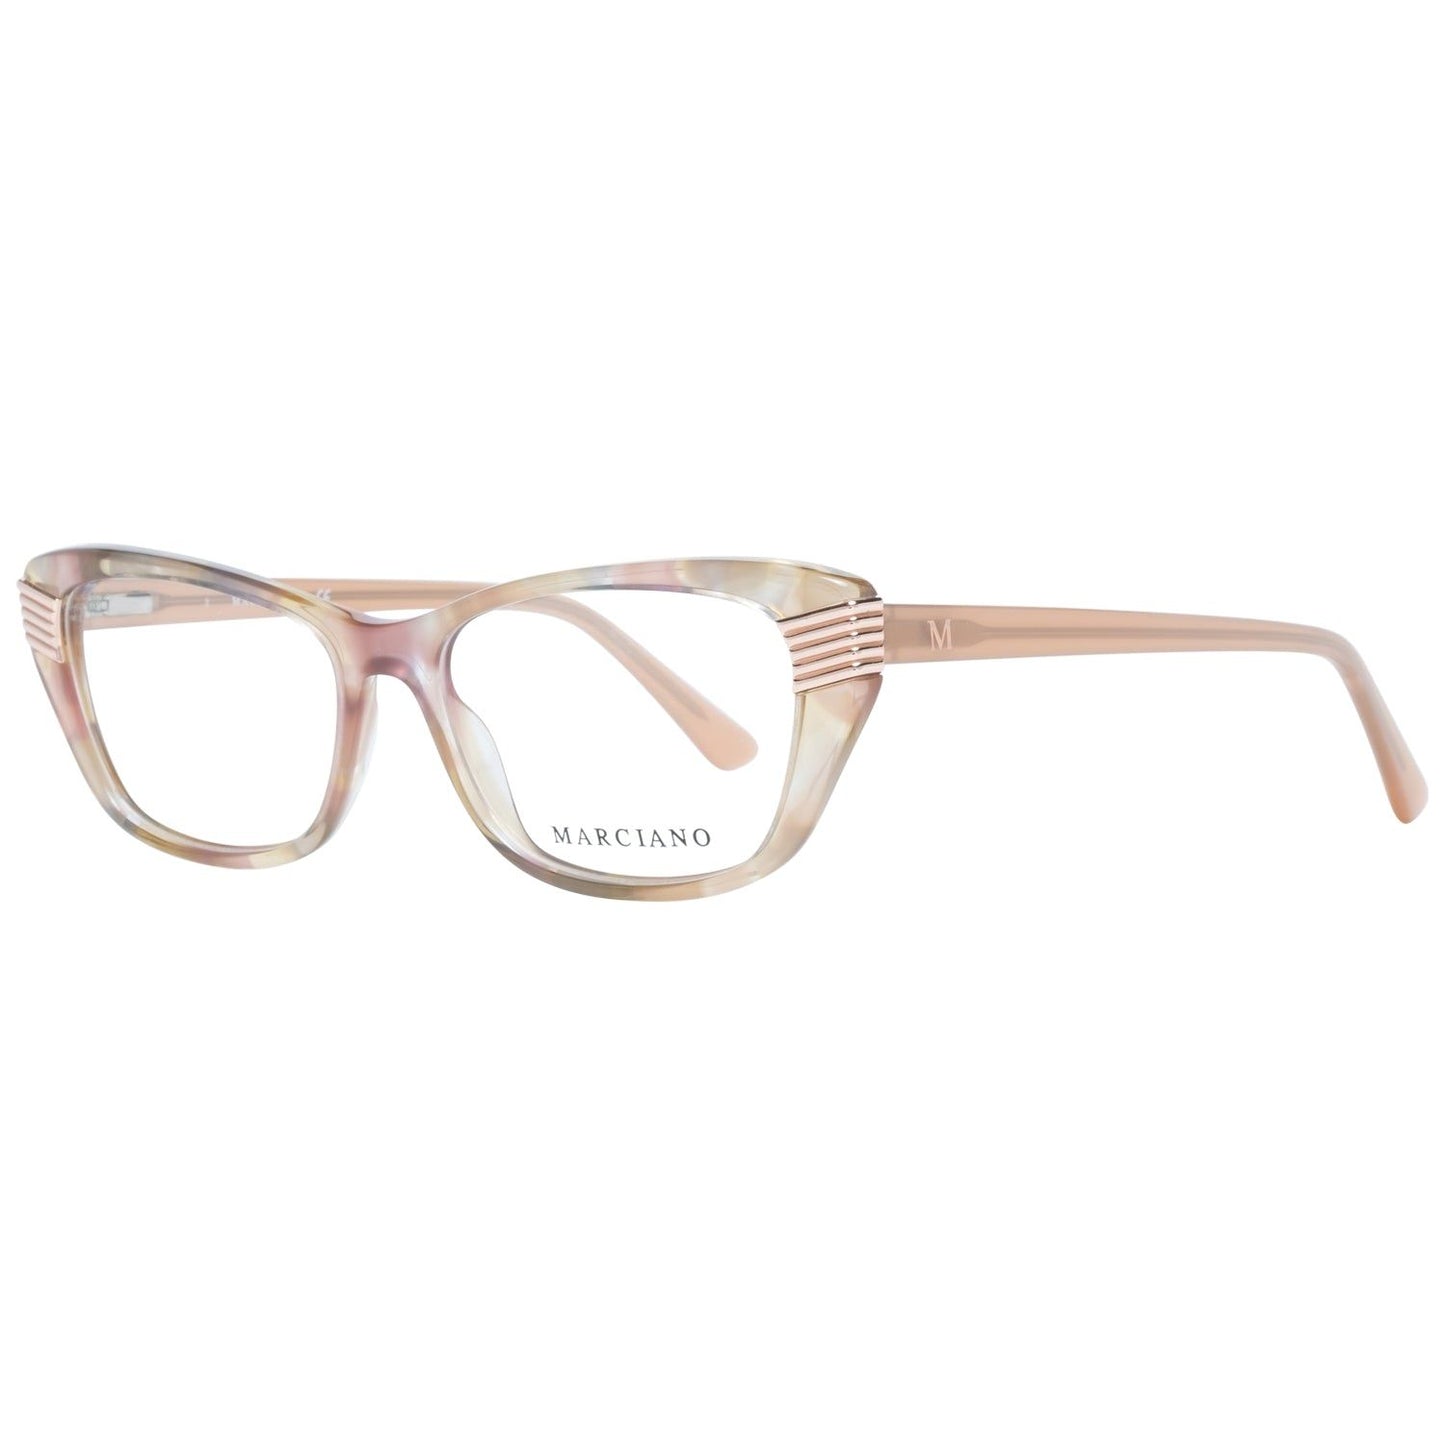 MARCIANO By GUESS EYEWEAR MARCIANO BY GUESS MOD. GM0385 53059 SUNGLASSES & EYEWEAR marciano-by-guess-mod-gm0385-53059